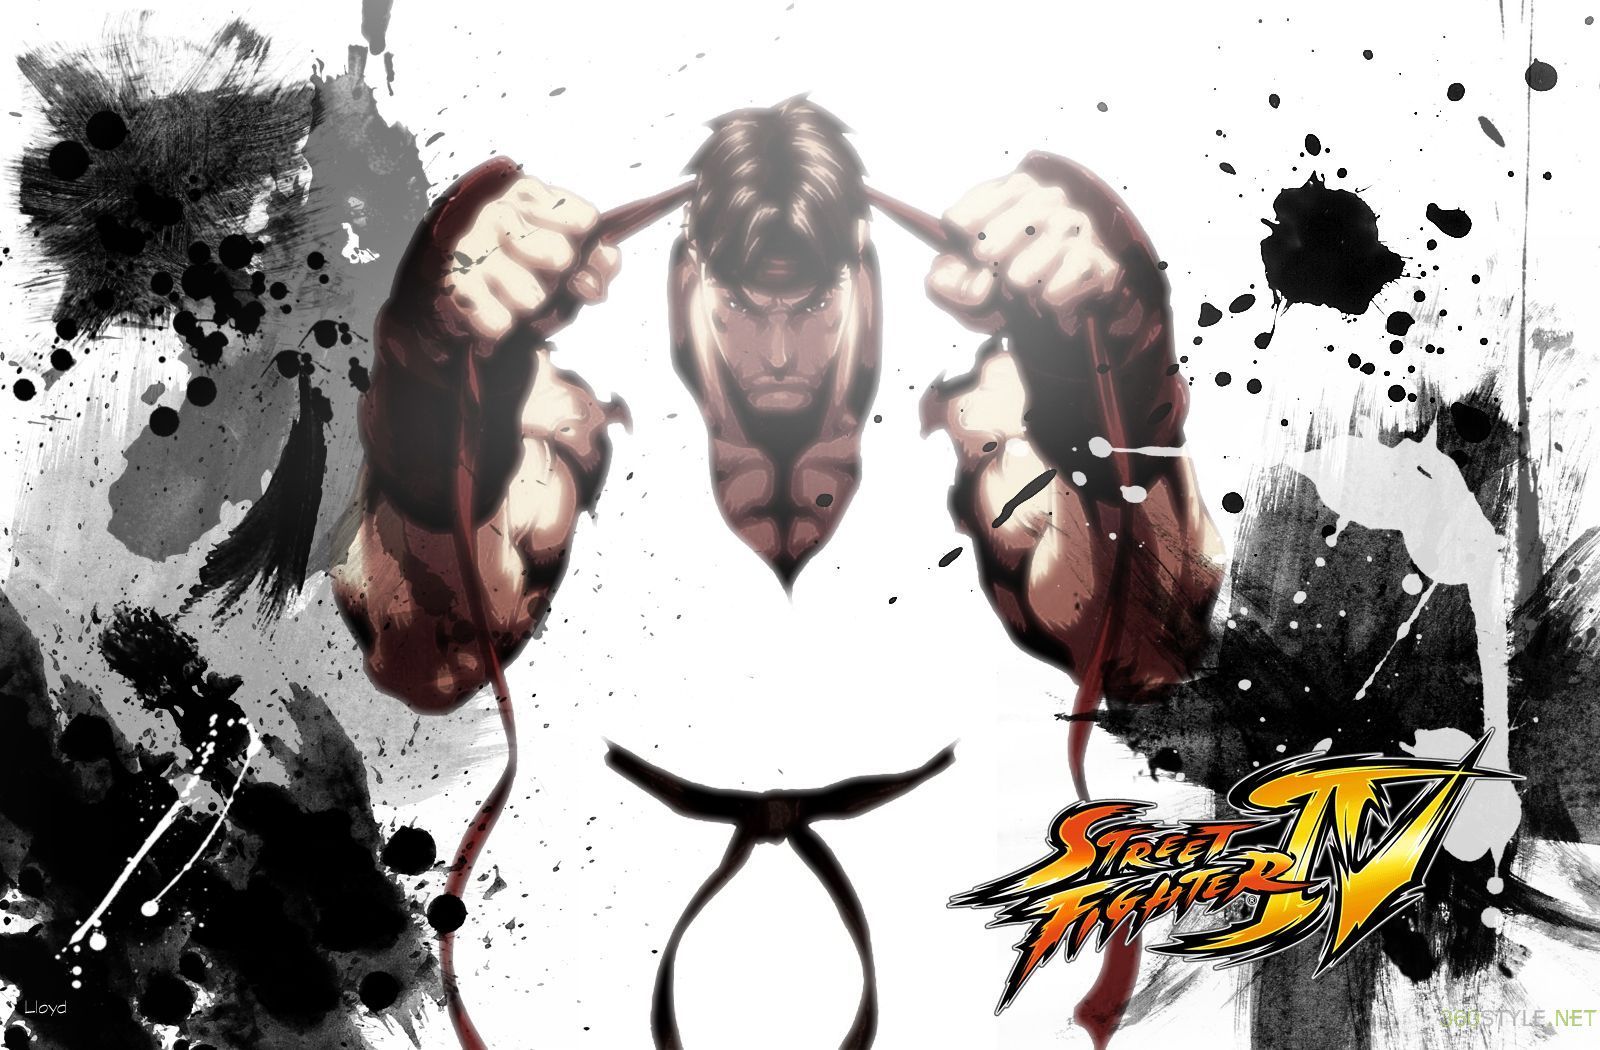 street_fighter_iv_wallpaper_by_igotgame1075.jpg